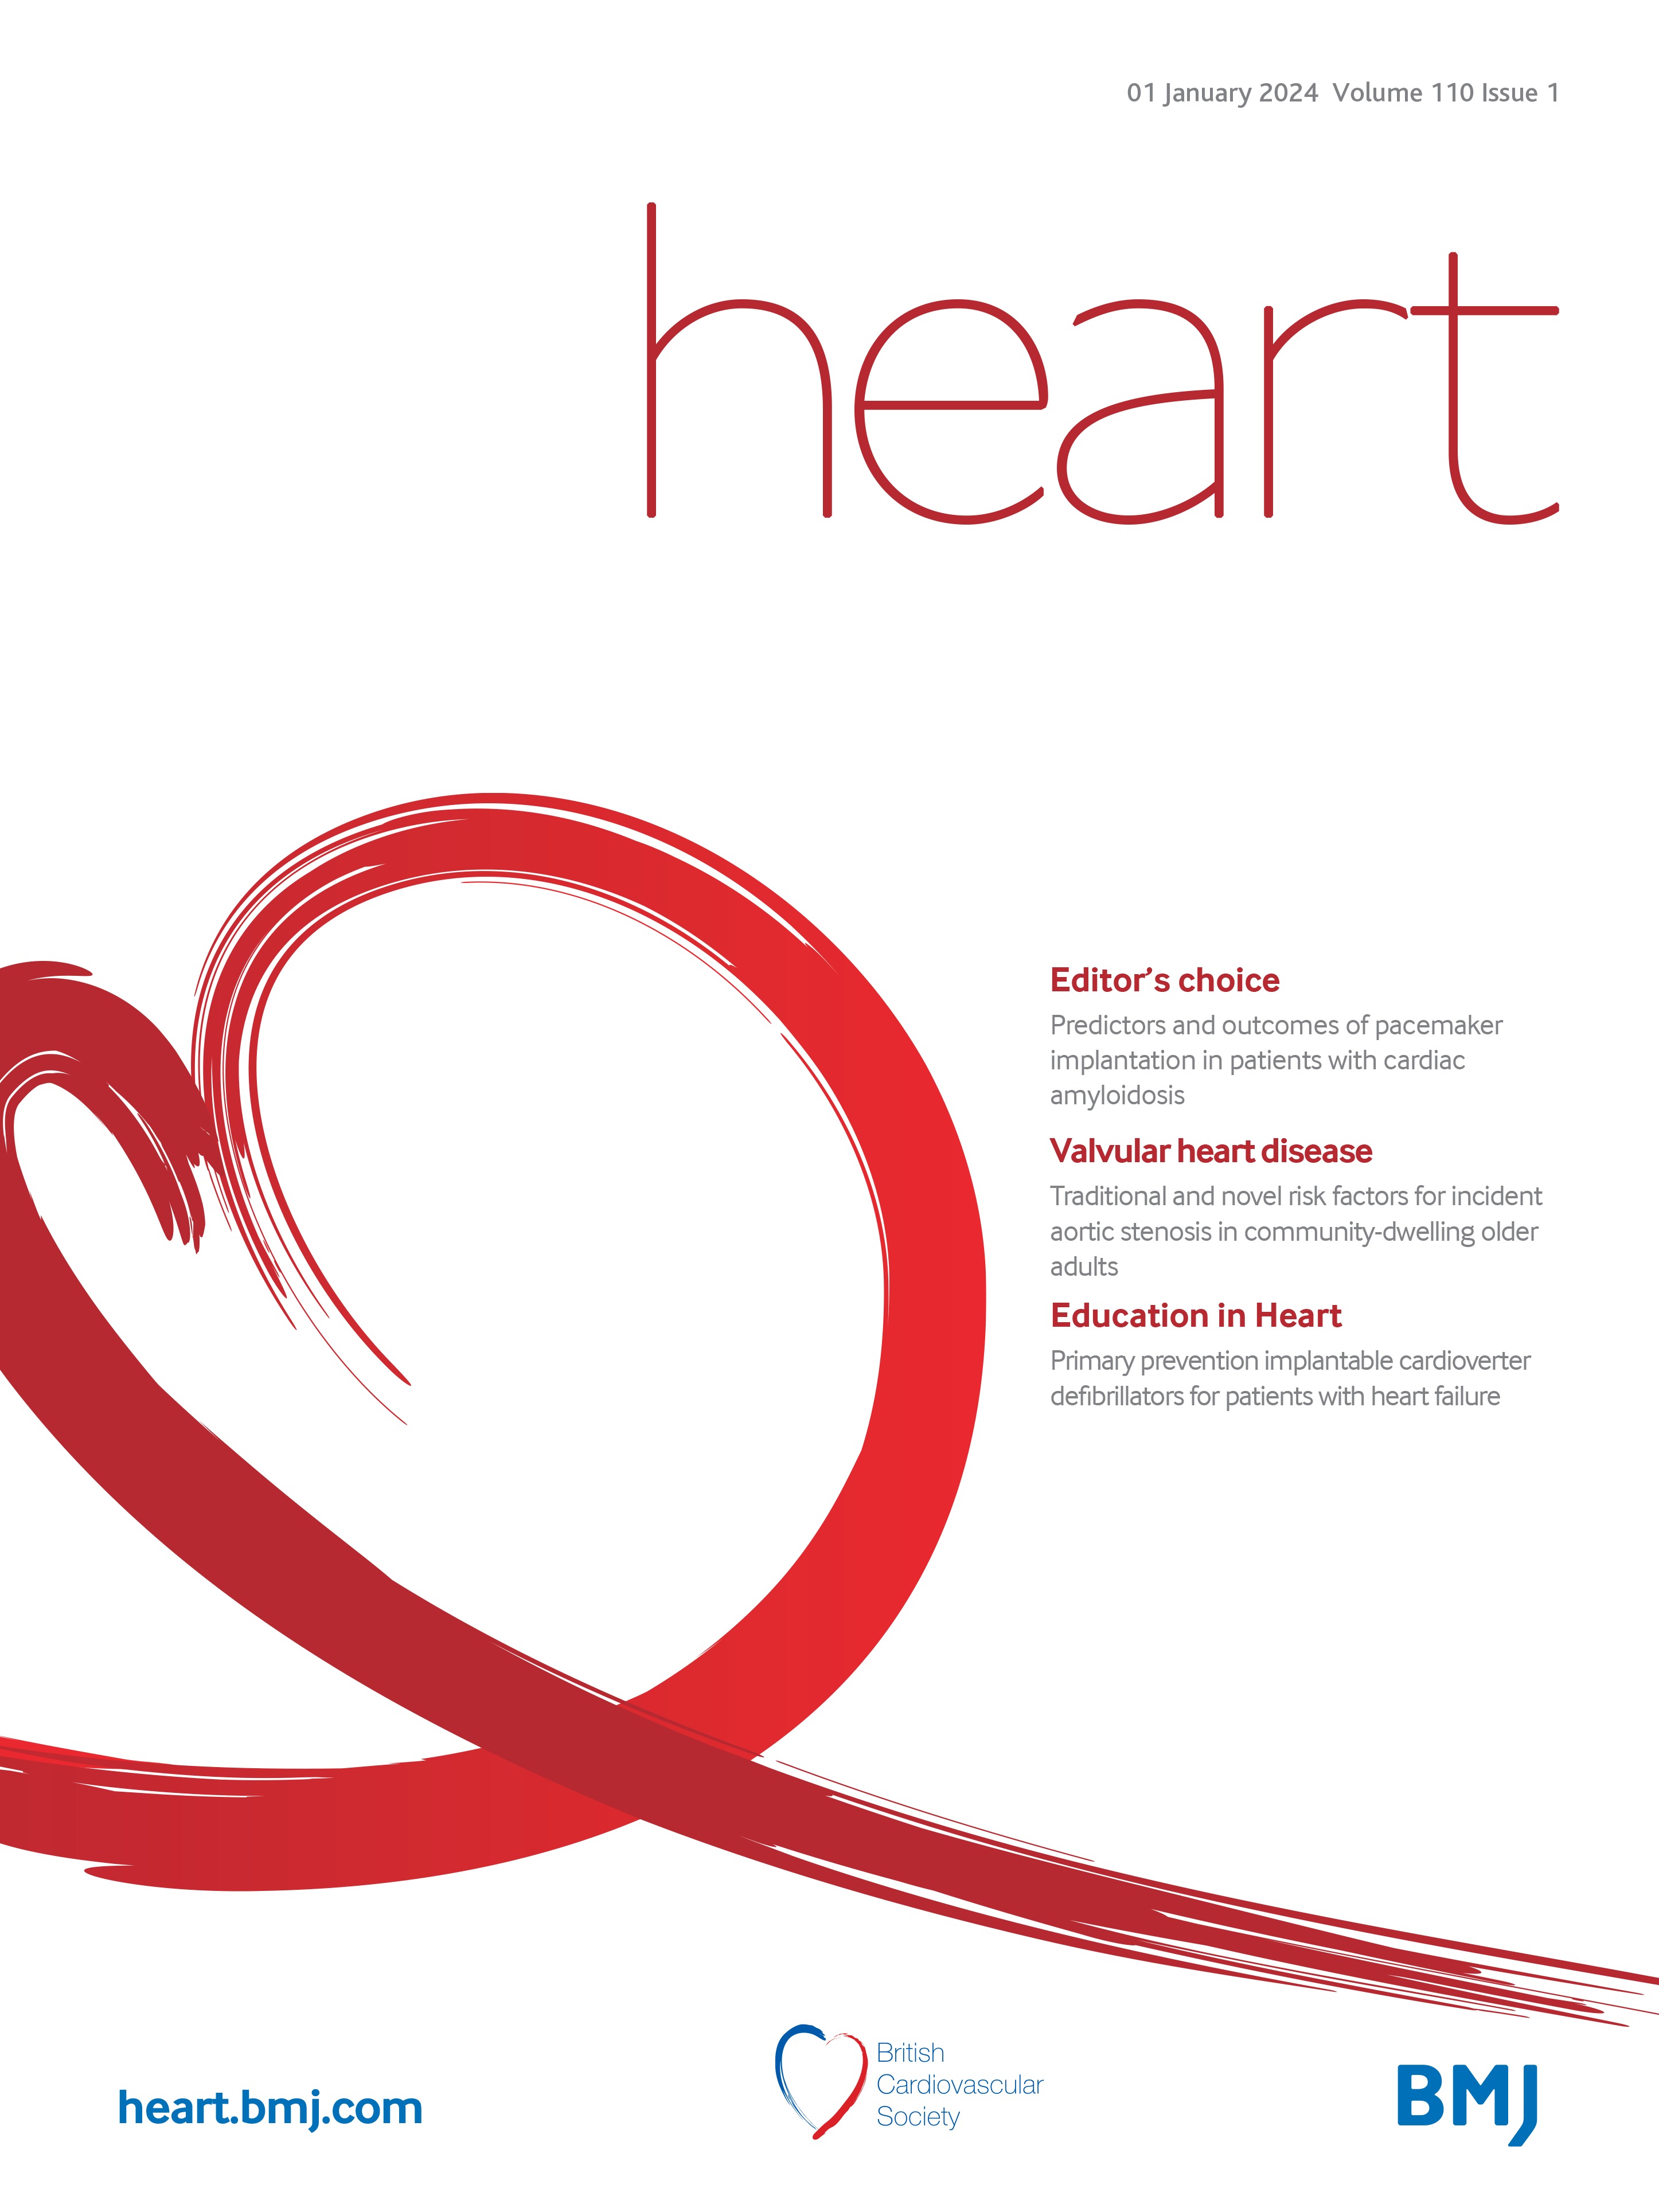 Predictors and outcomes of pacemaker implantation in patients with cardiac amyloidosis